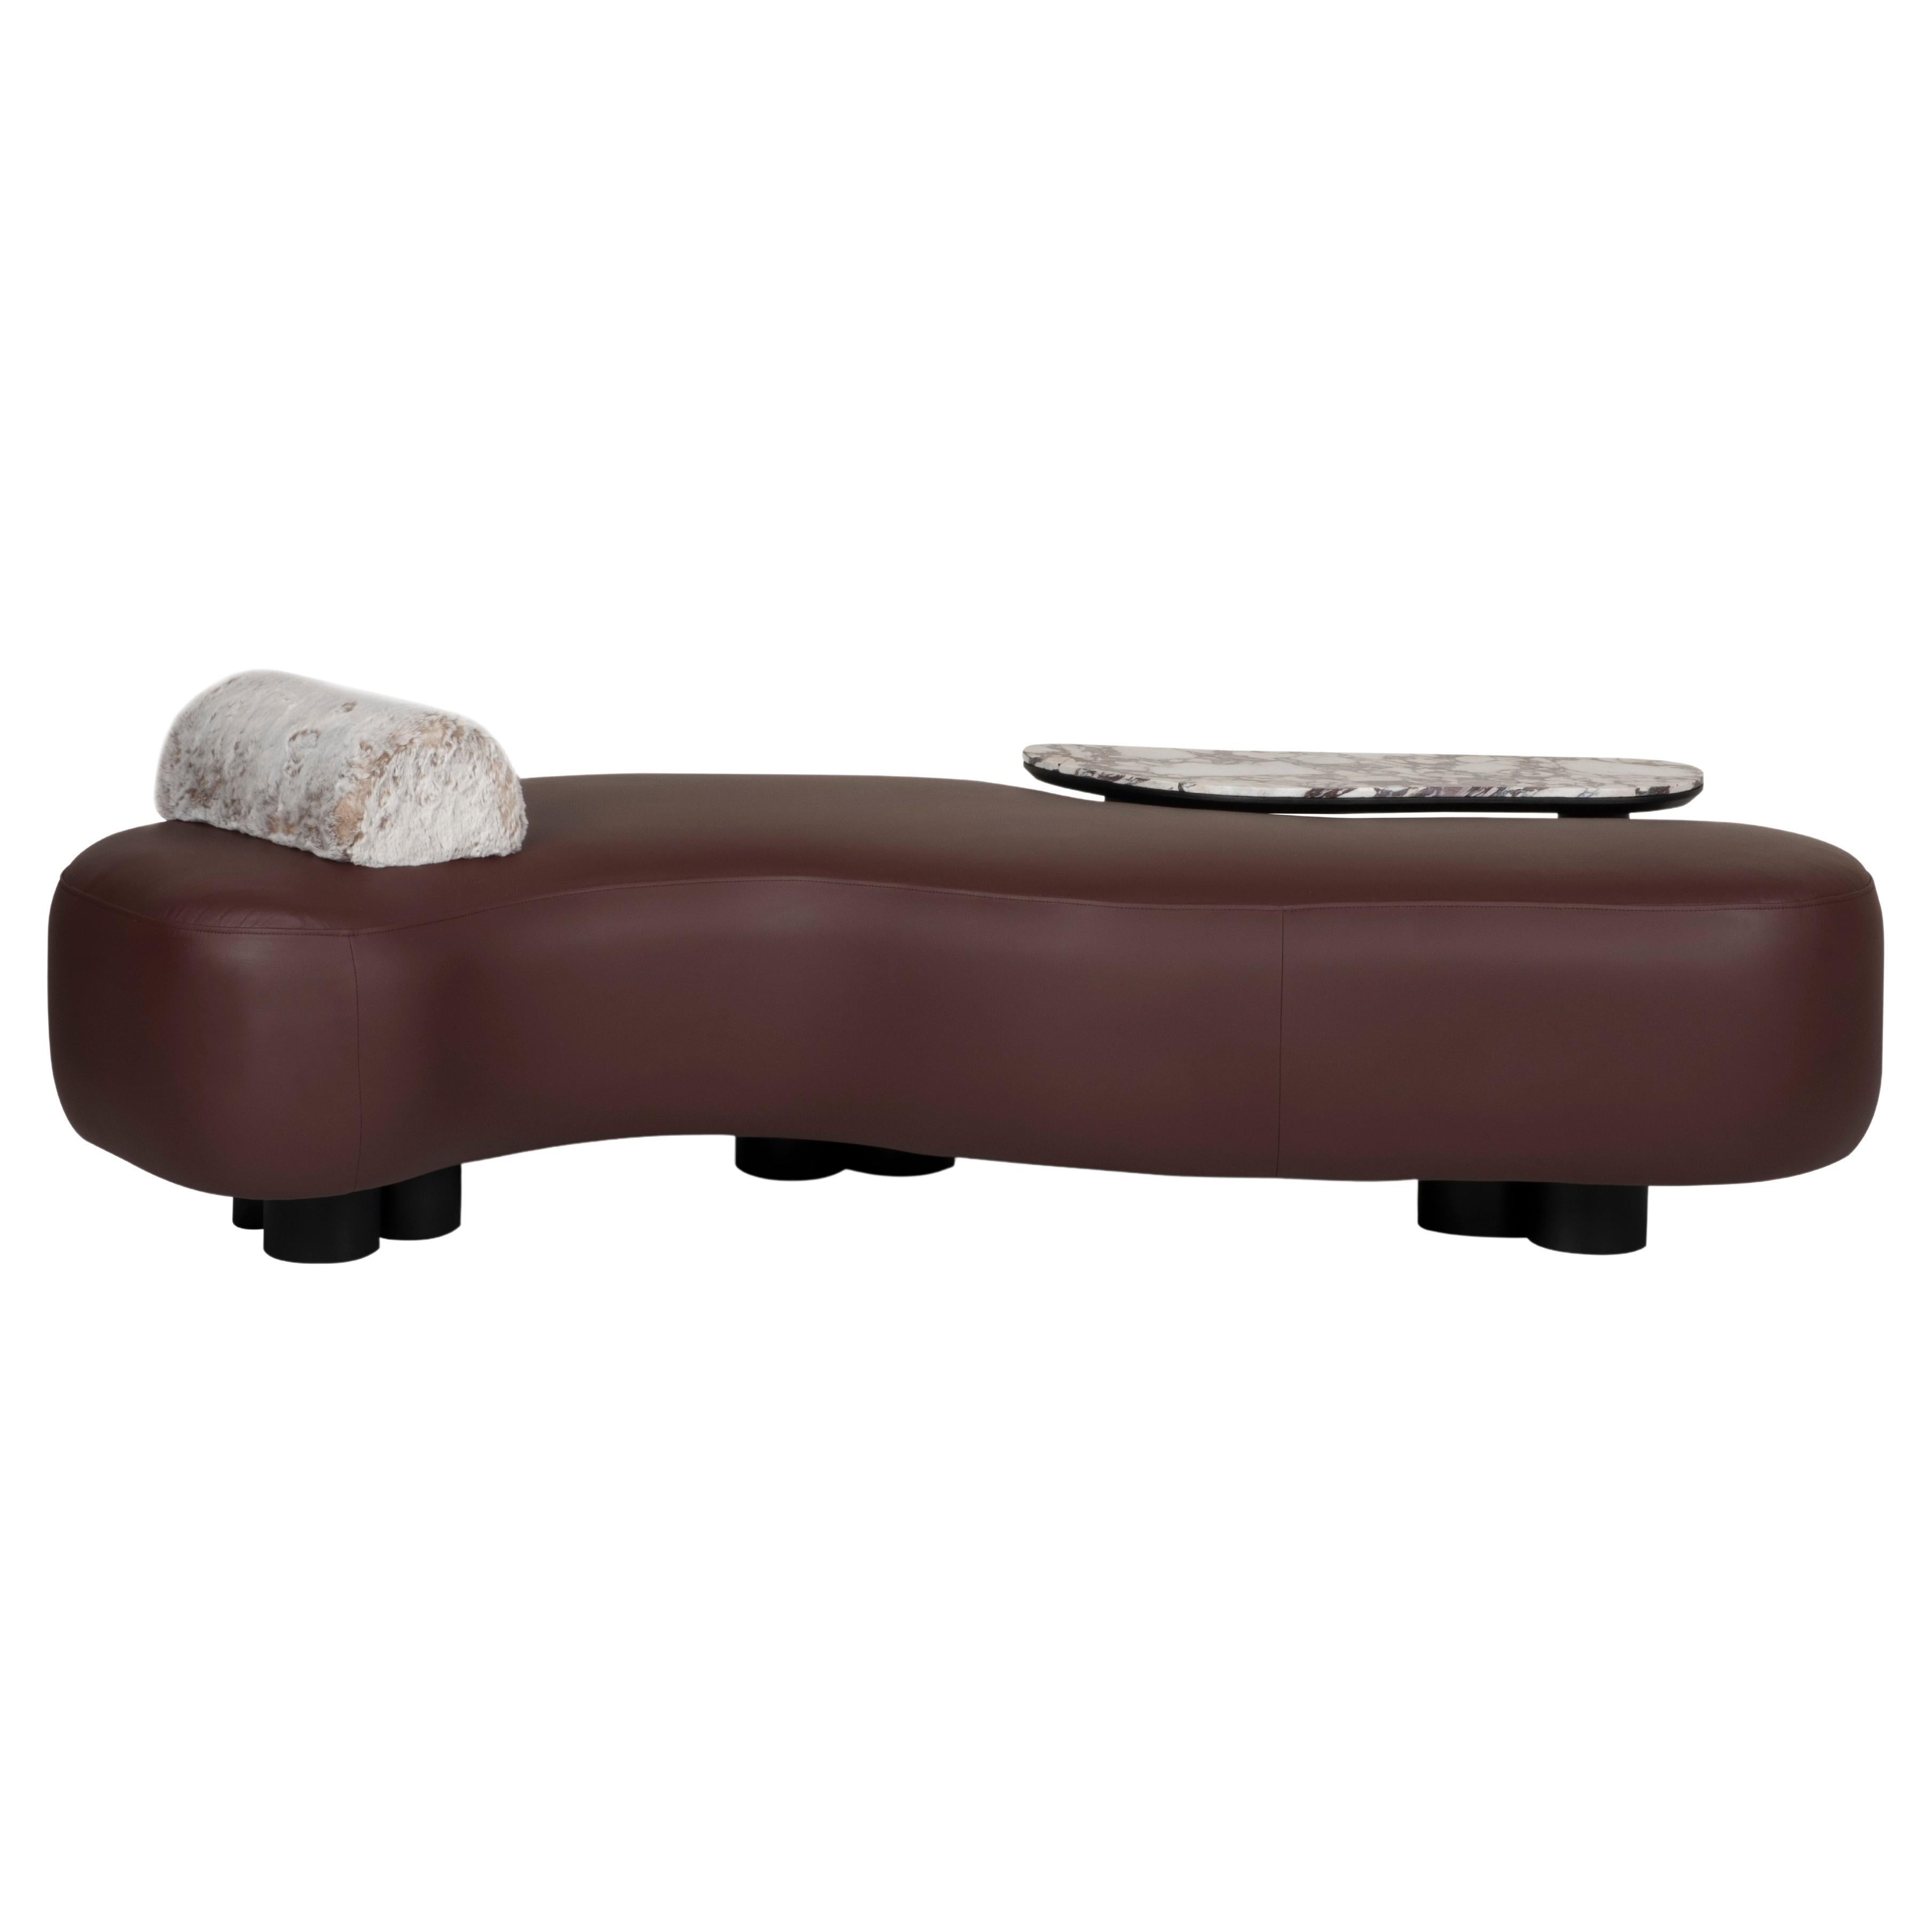 Modern Minho Leather Chaise Lounge, Day Bed, Handmade in Portugal by Greenapple